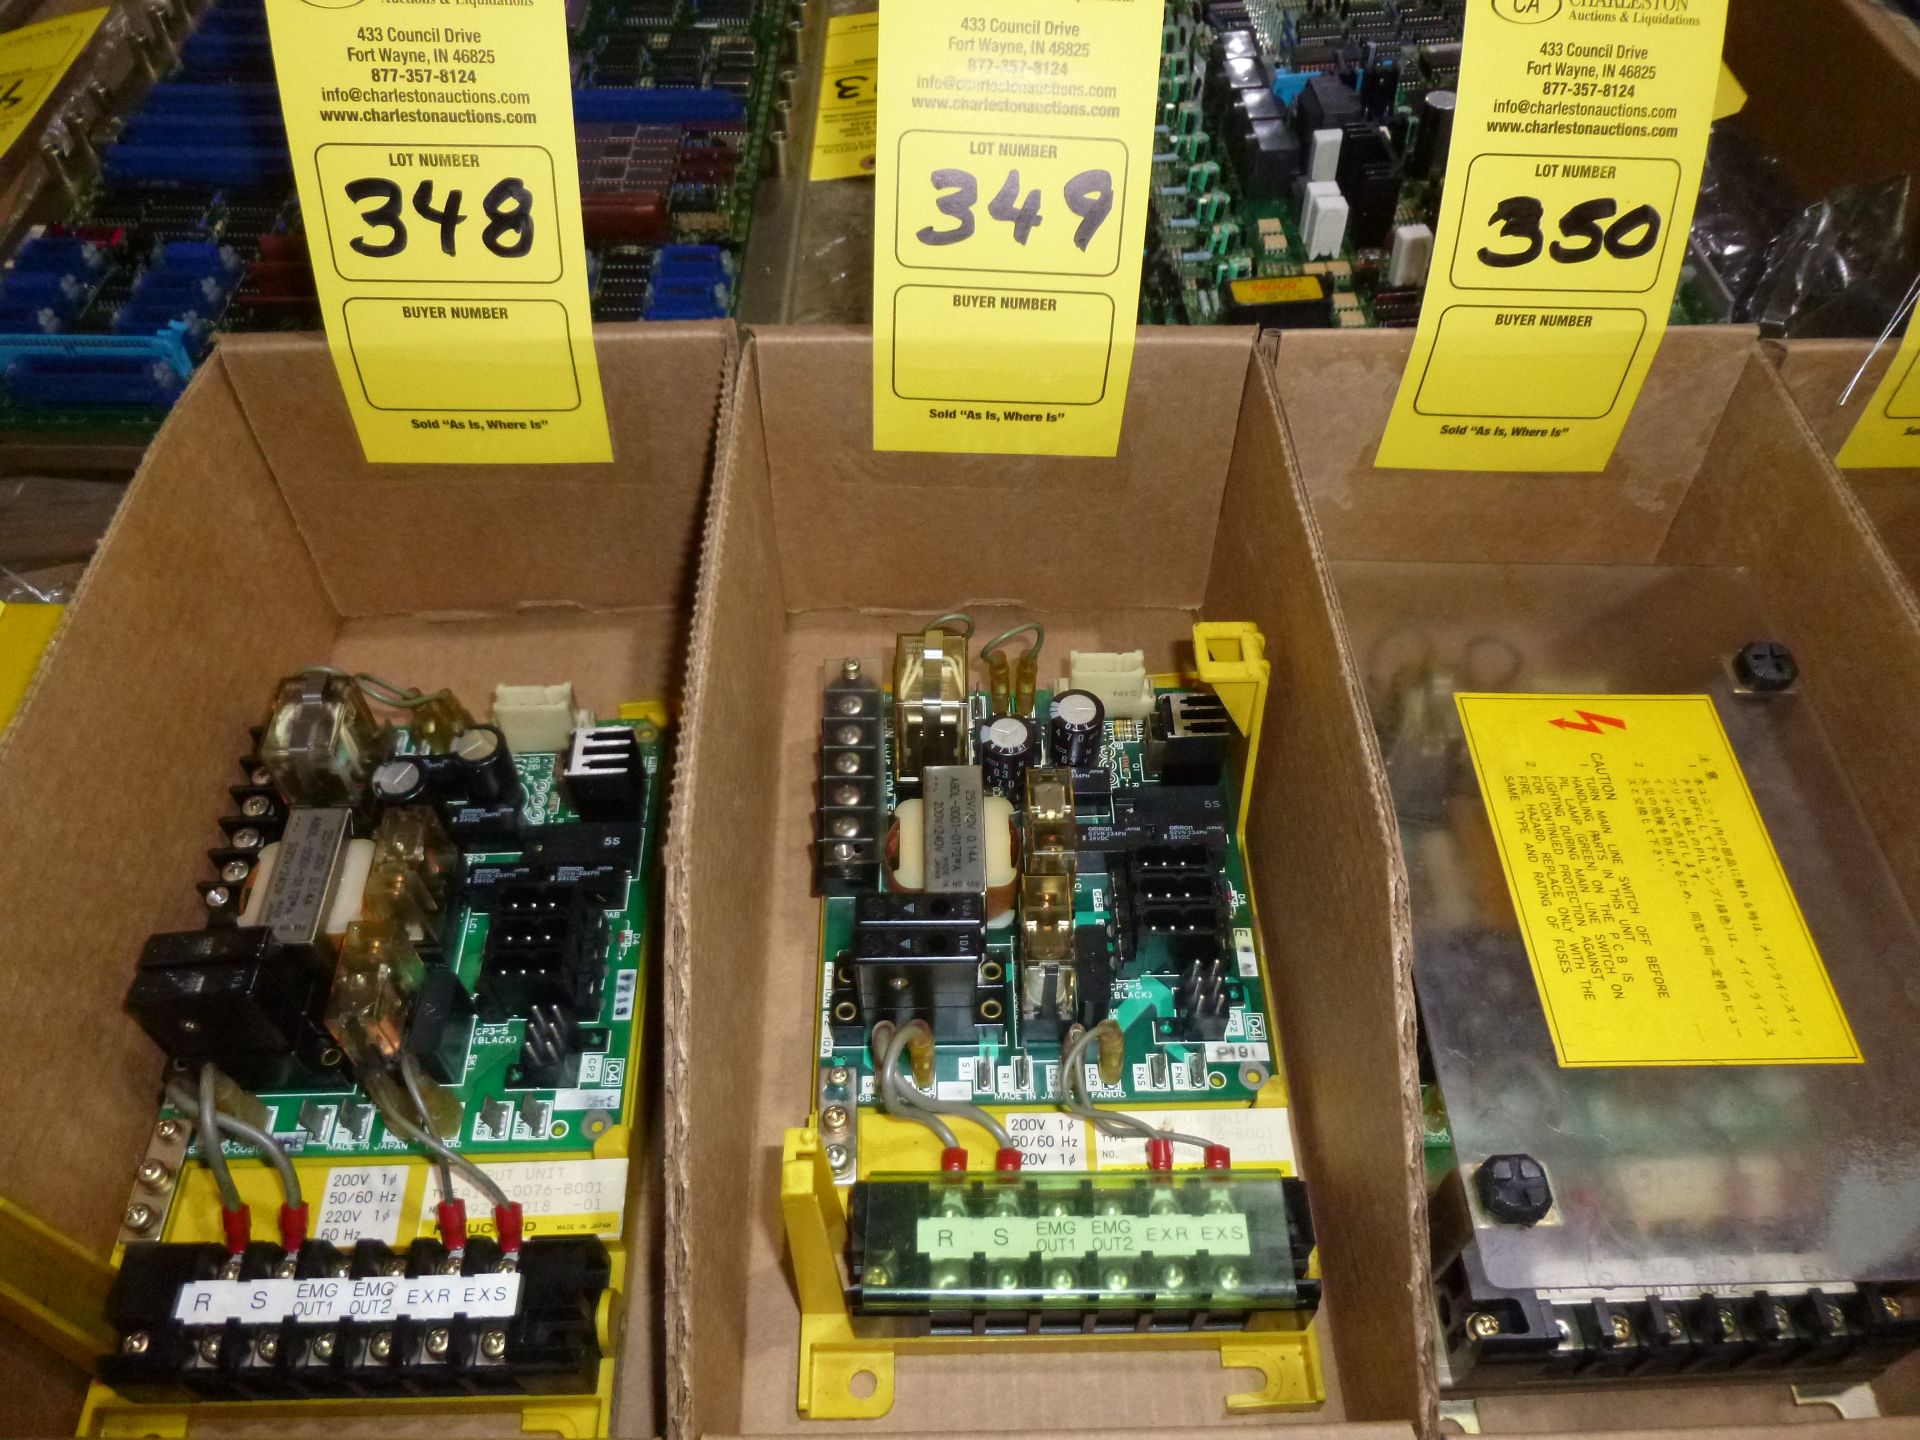 Fanuc input unit model A14B-0076-B001, as always with Brolyn LLC auctions, all lots can be picked up